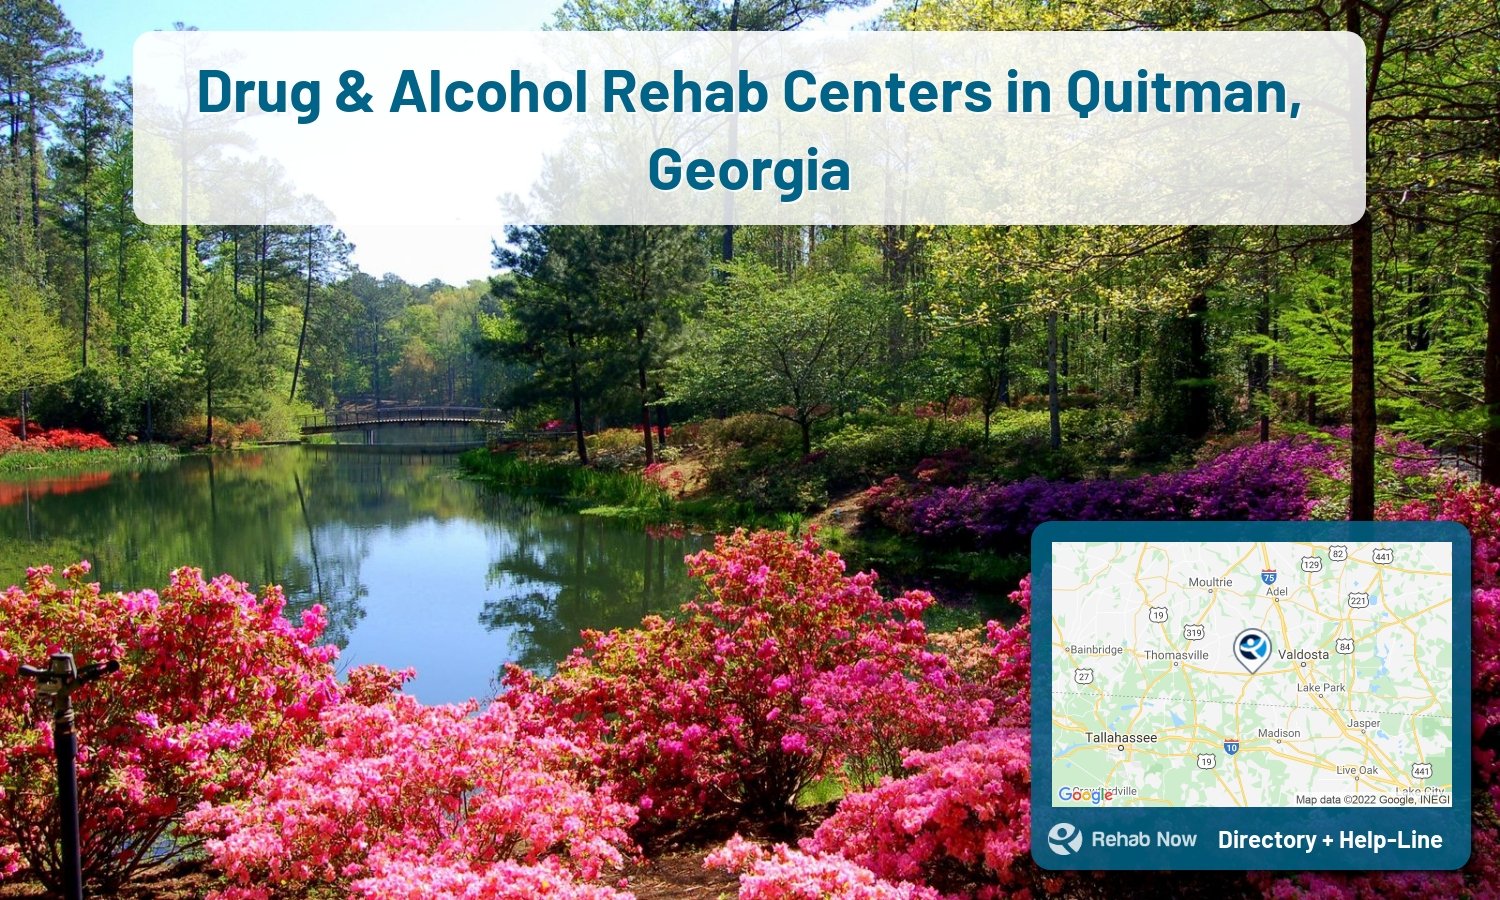 List of alcohol and drug treatment centers near you in Quitman, Georgia. Research certifications, programs, methods, pricing, and more.